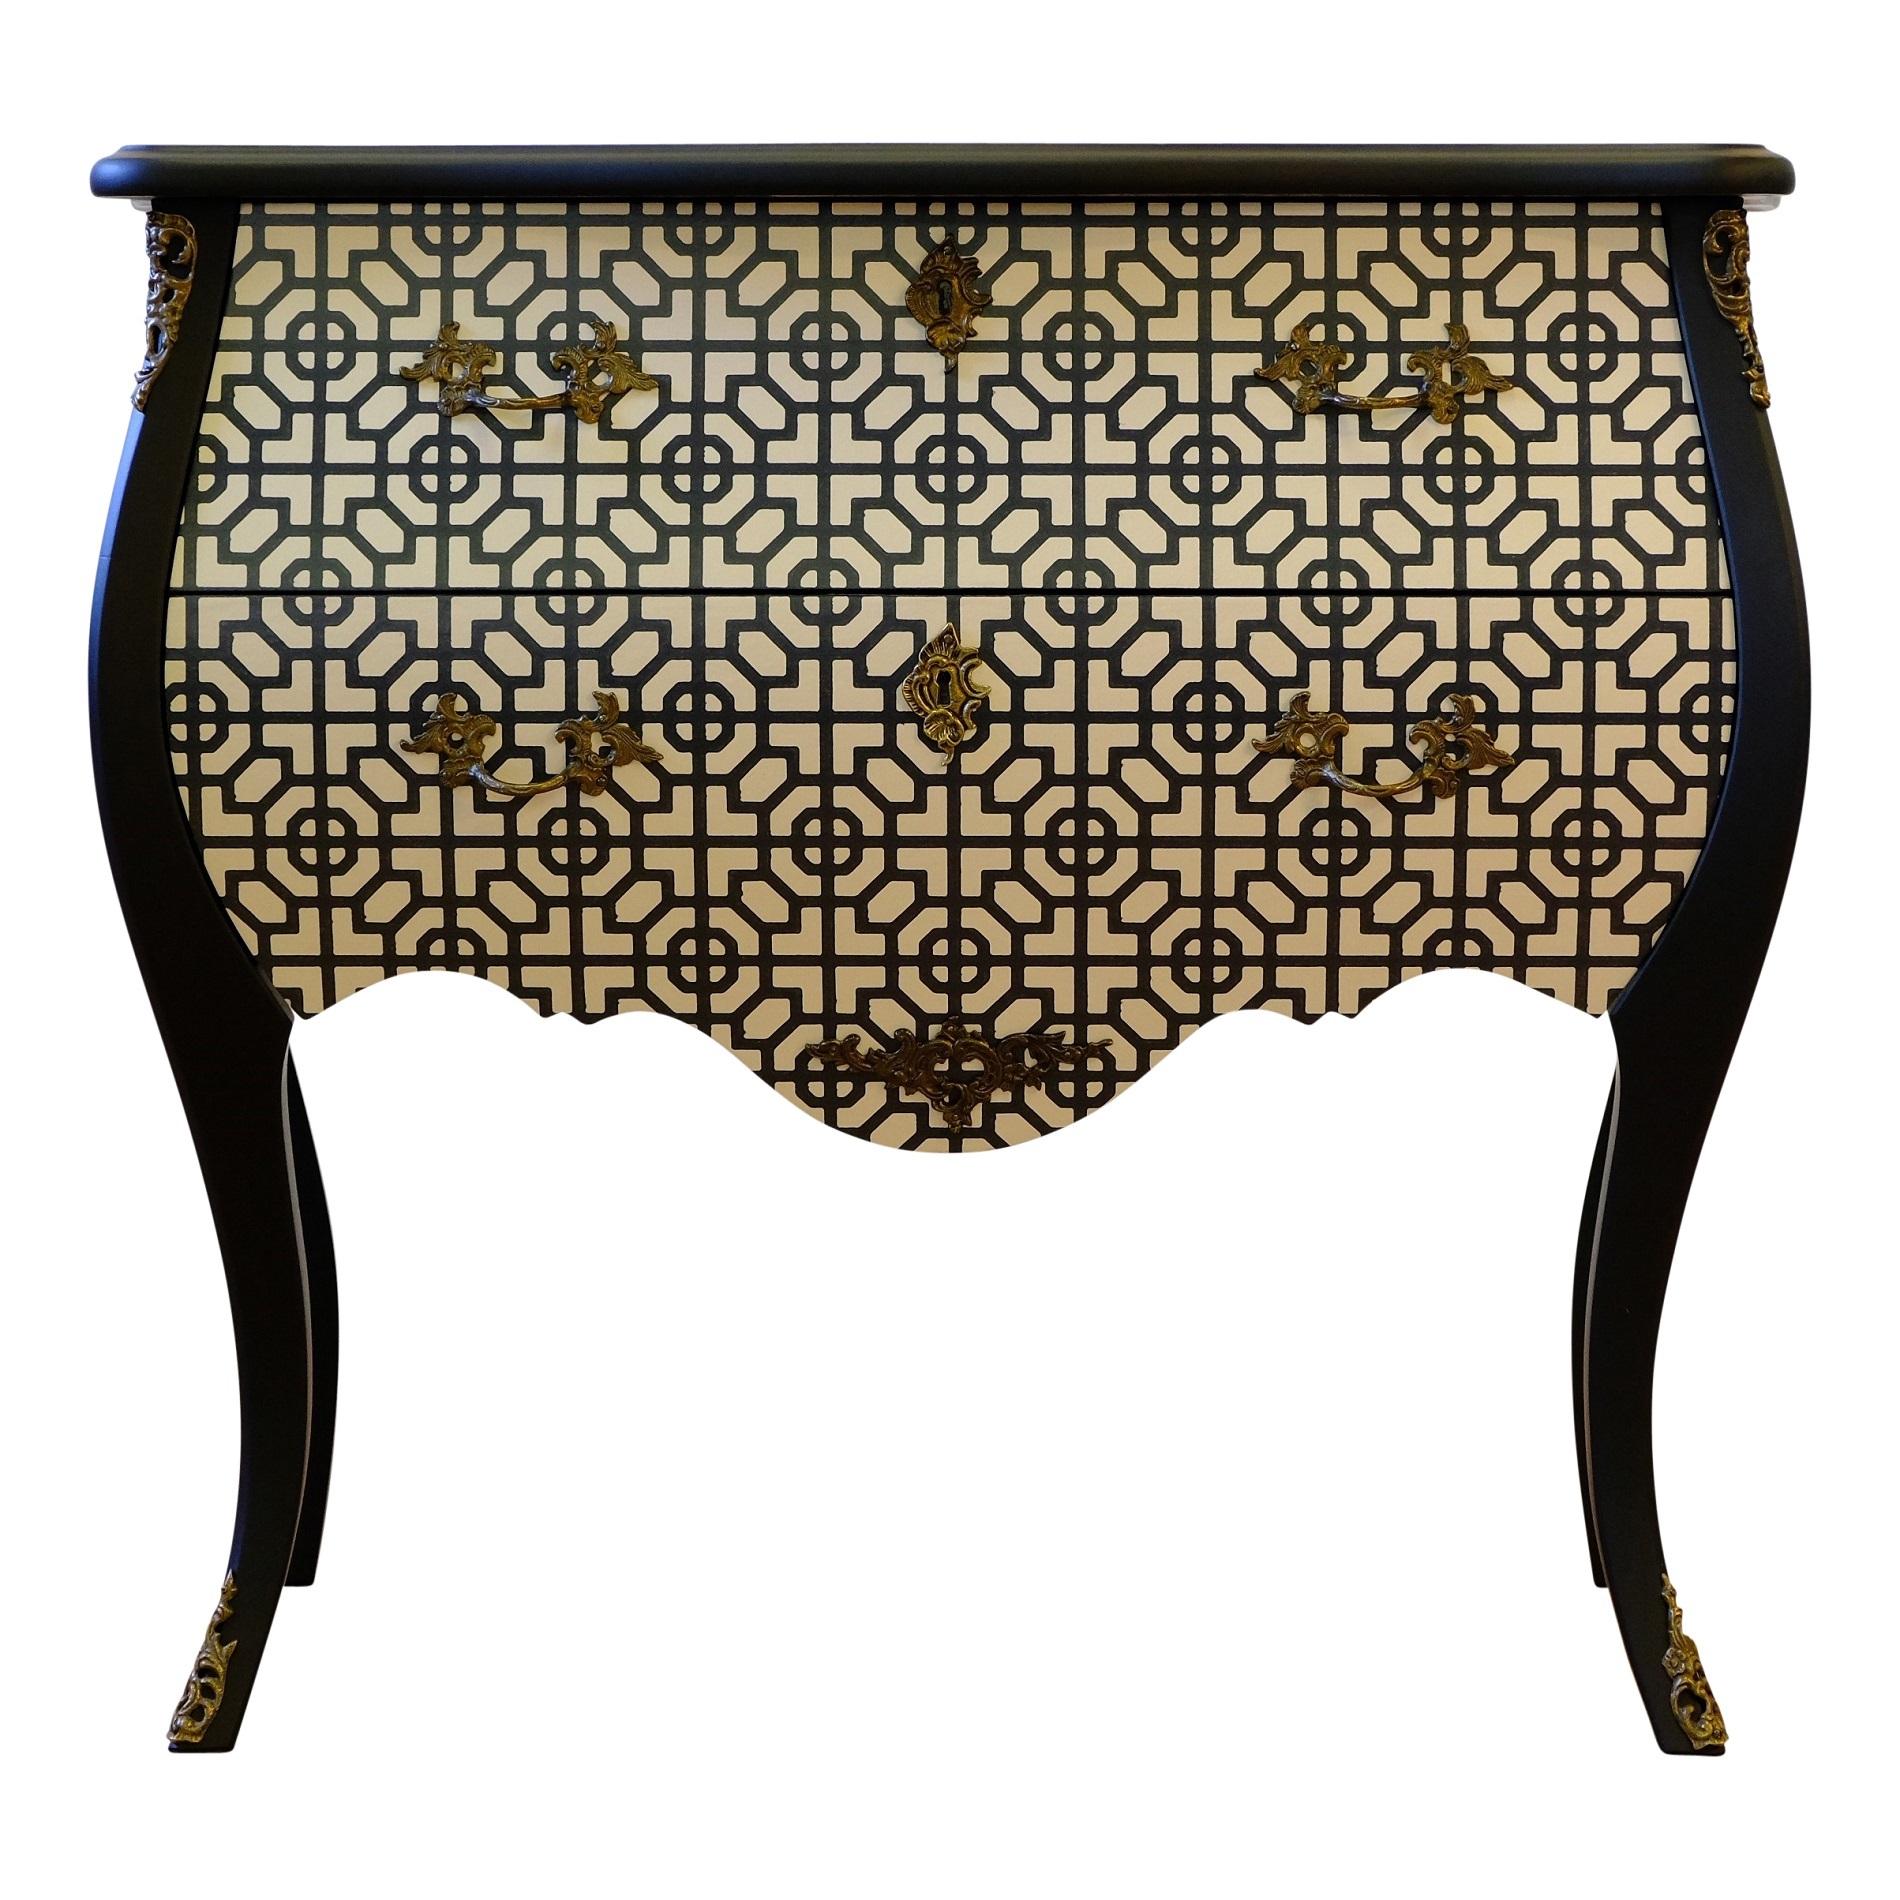 Antique Rococo bureau with marble top and legs in matte black. Front and side in an Art Deco black and white graphic pattern. Fine original fittings in solid brass. 
Measures: Width: 78cm / 30.7